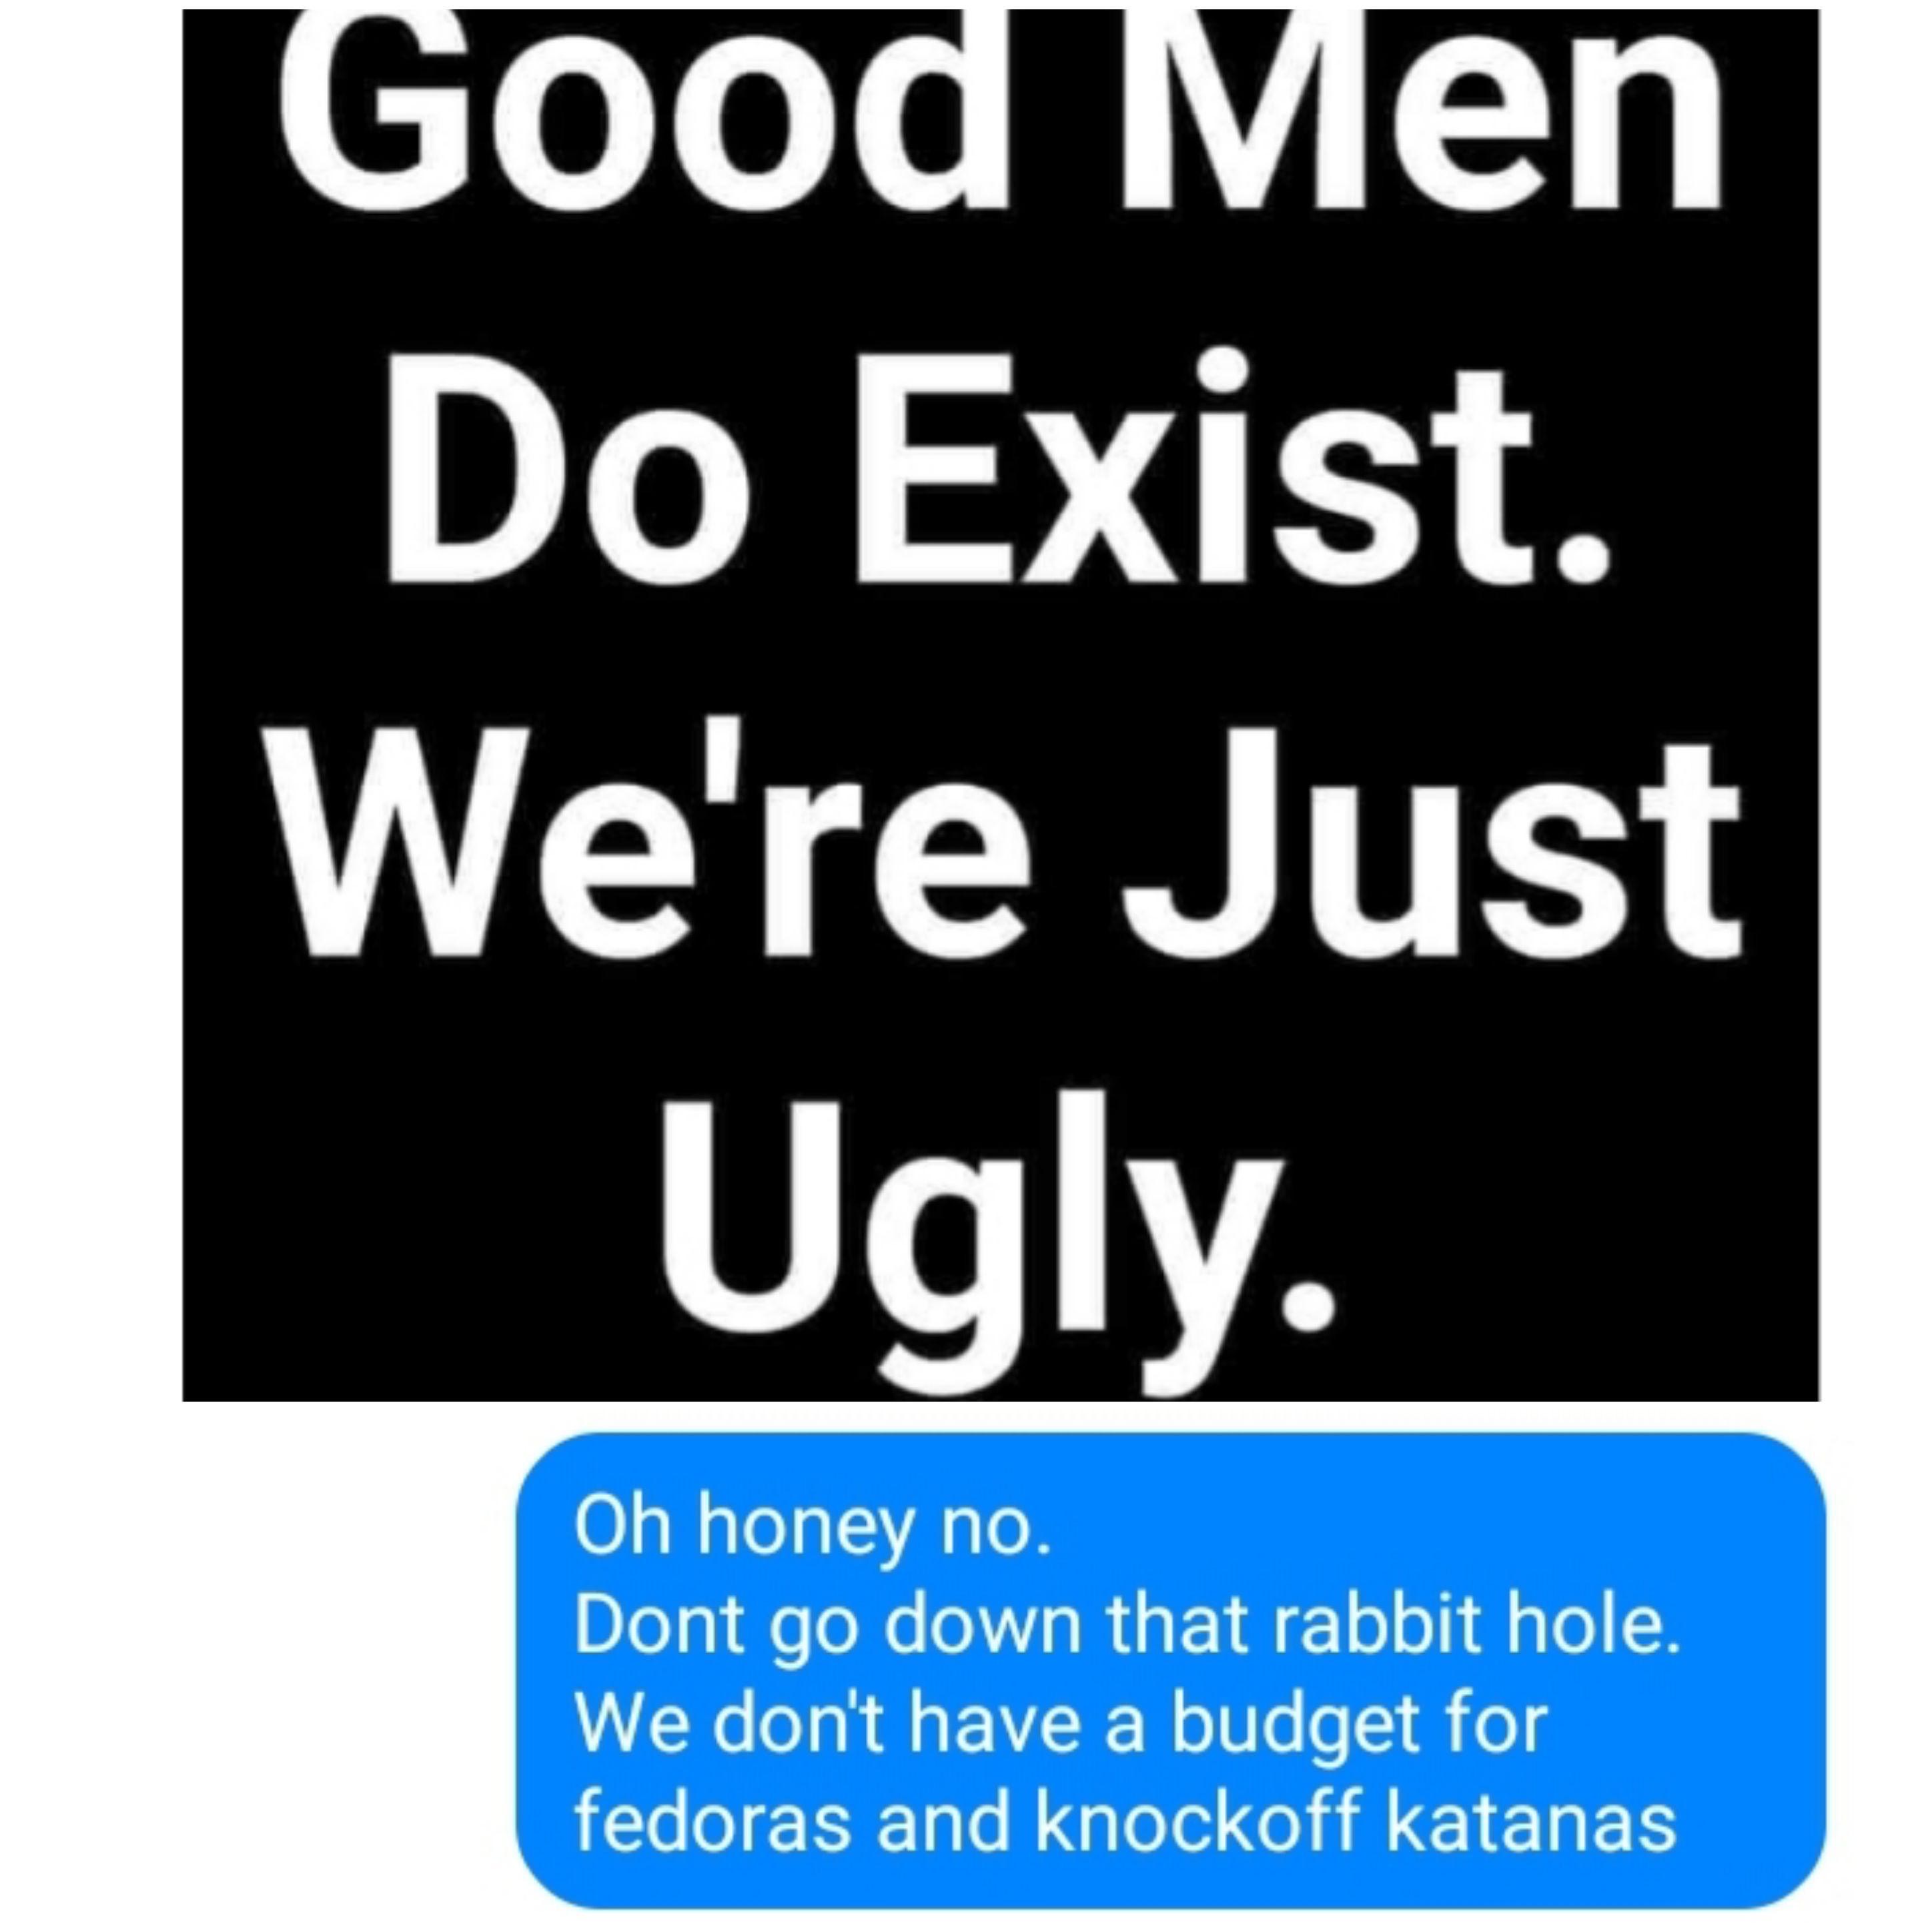 communication - Good Men Do Exist. We're Just Ugly. Oh honey no. Dont go down that rabbit hole. We don't have a budget for fedoras and knockoff katanas